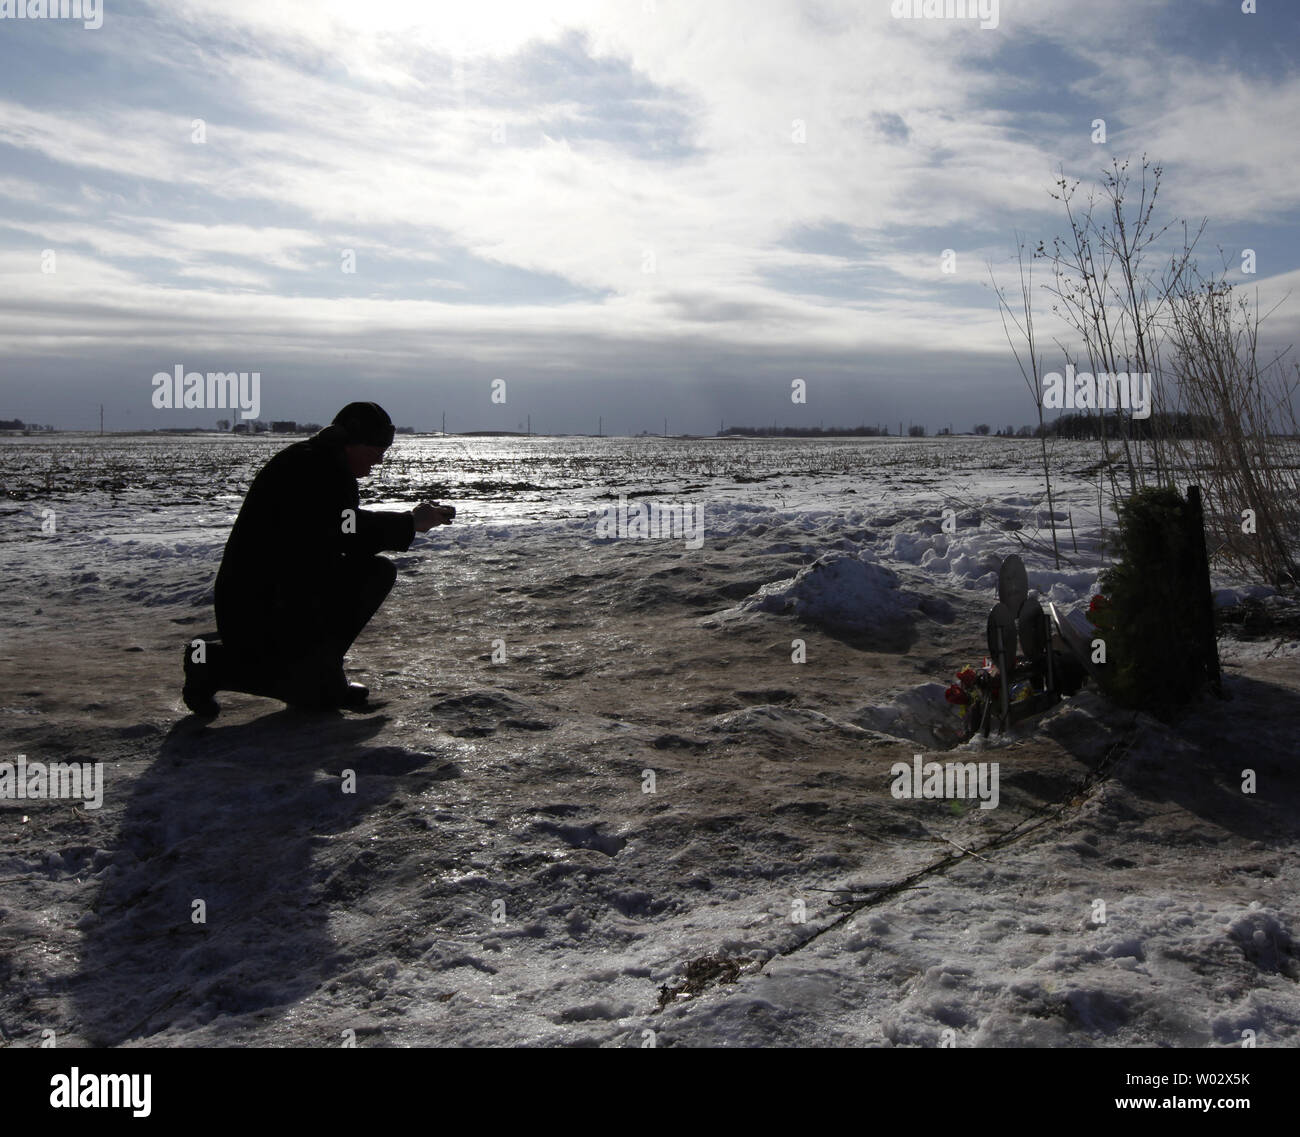 Brian Wilson of Toronto, Canada takes a photo of a memorial at the site of the plane crash that killed Buddy Holly, Ritchie Valens and J. P. 'The Big Bopper' Richardson near Clear Lake, Iowa on February 2, 2009. Singer Don McLean coined the phrase 'the day the music died' in his hit song American Pie referring to the death of the three rock 'n' roll pioneers in the early morning hours of February 3, 1959. Thousands of people descended upon Clear Lake to celebrate the 50th anniversary of 'the day the music died'.   UPI/Brian Kersey Stock Photo